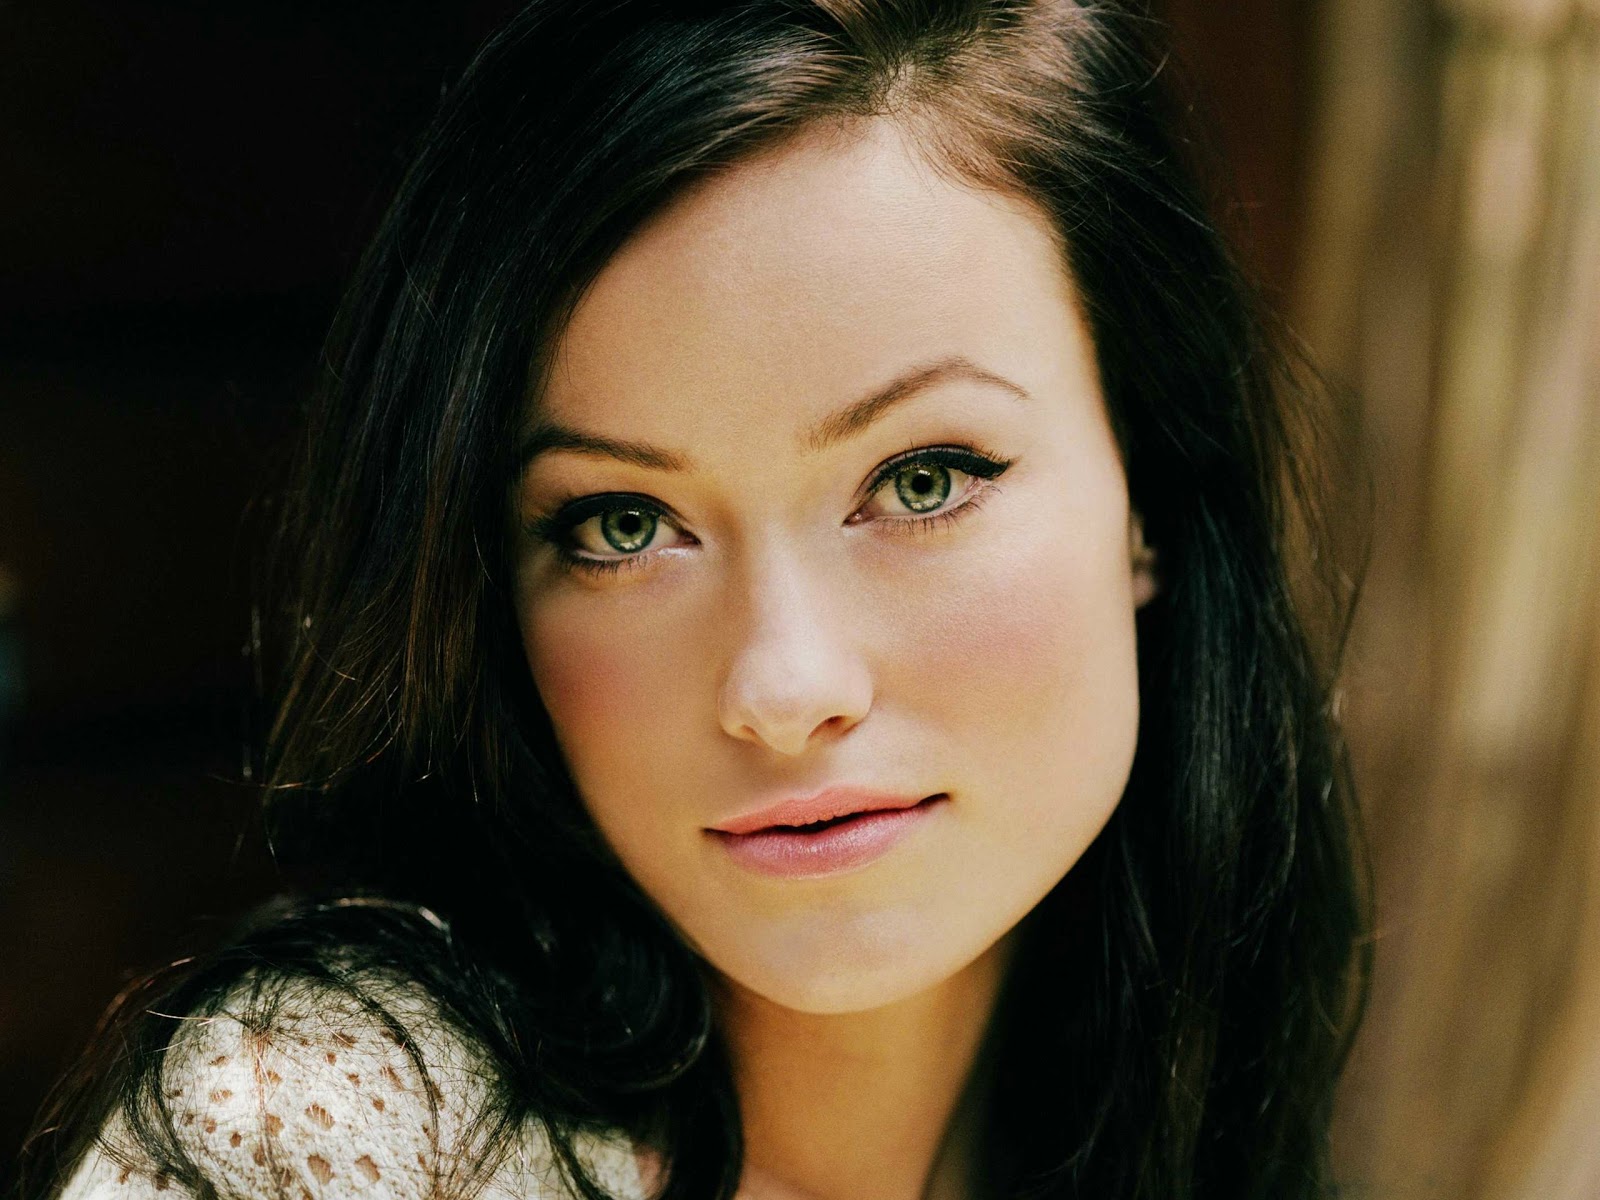 Olivia Wilde From Tron Legacy │hd Wallpapers ~ Hd Beauties